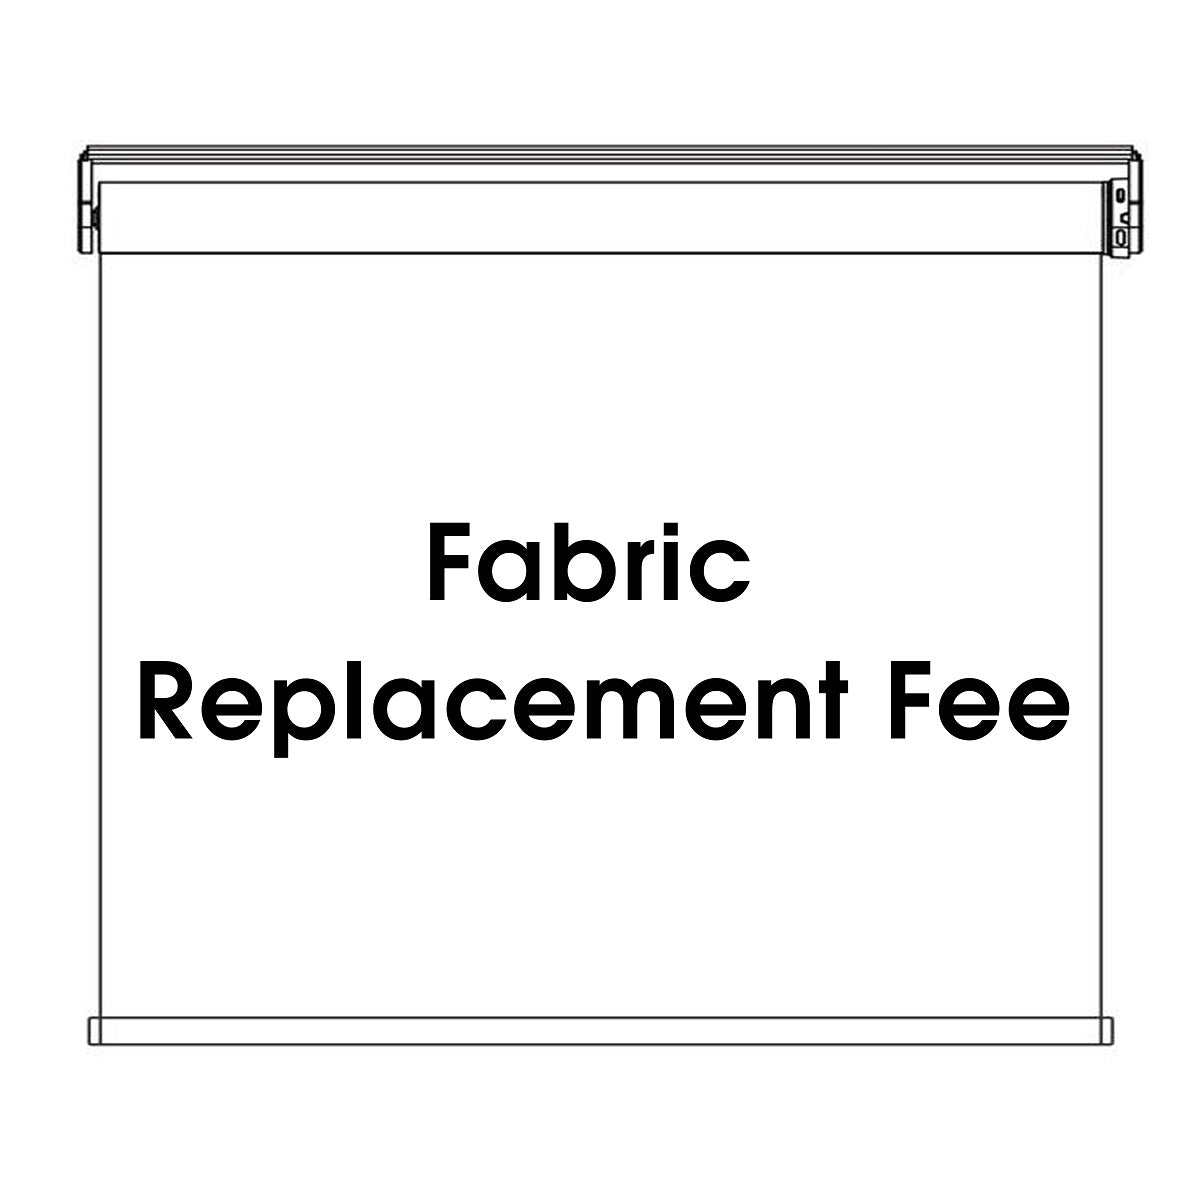 Fabric Replacement Fee